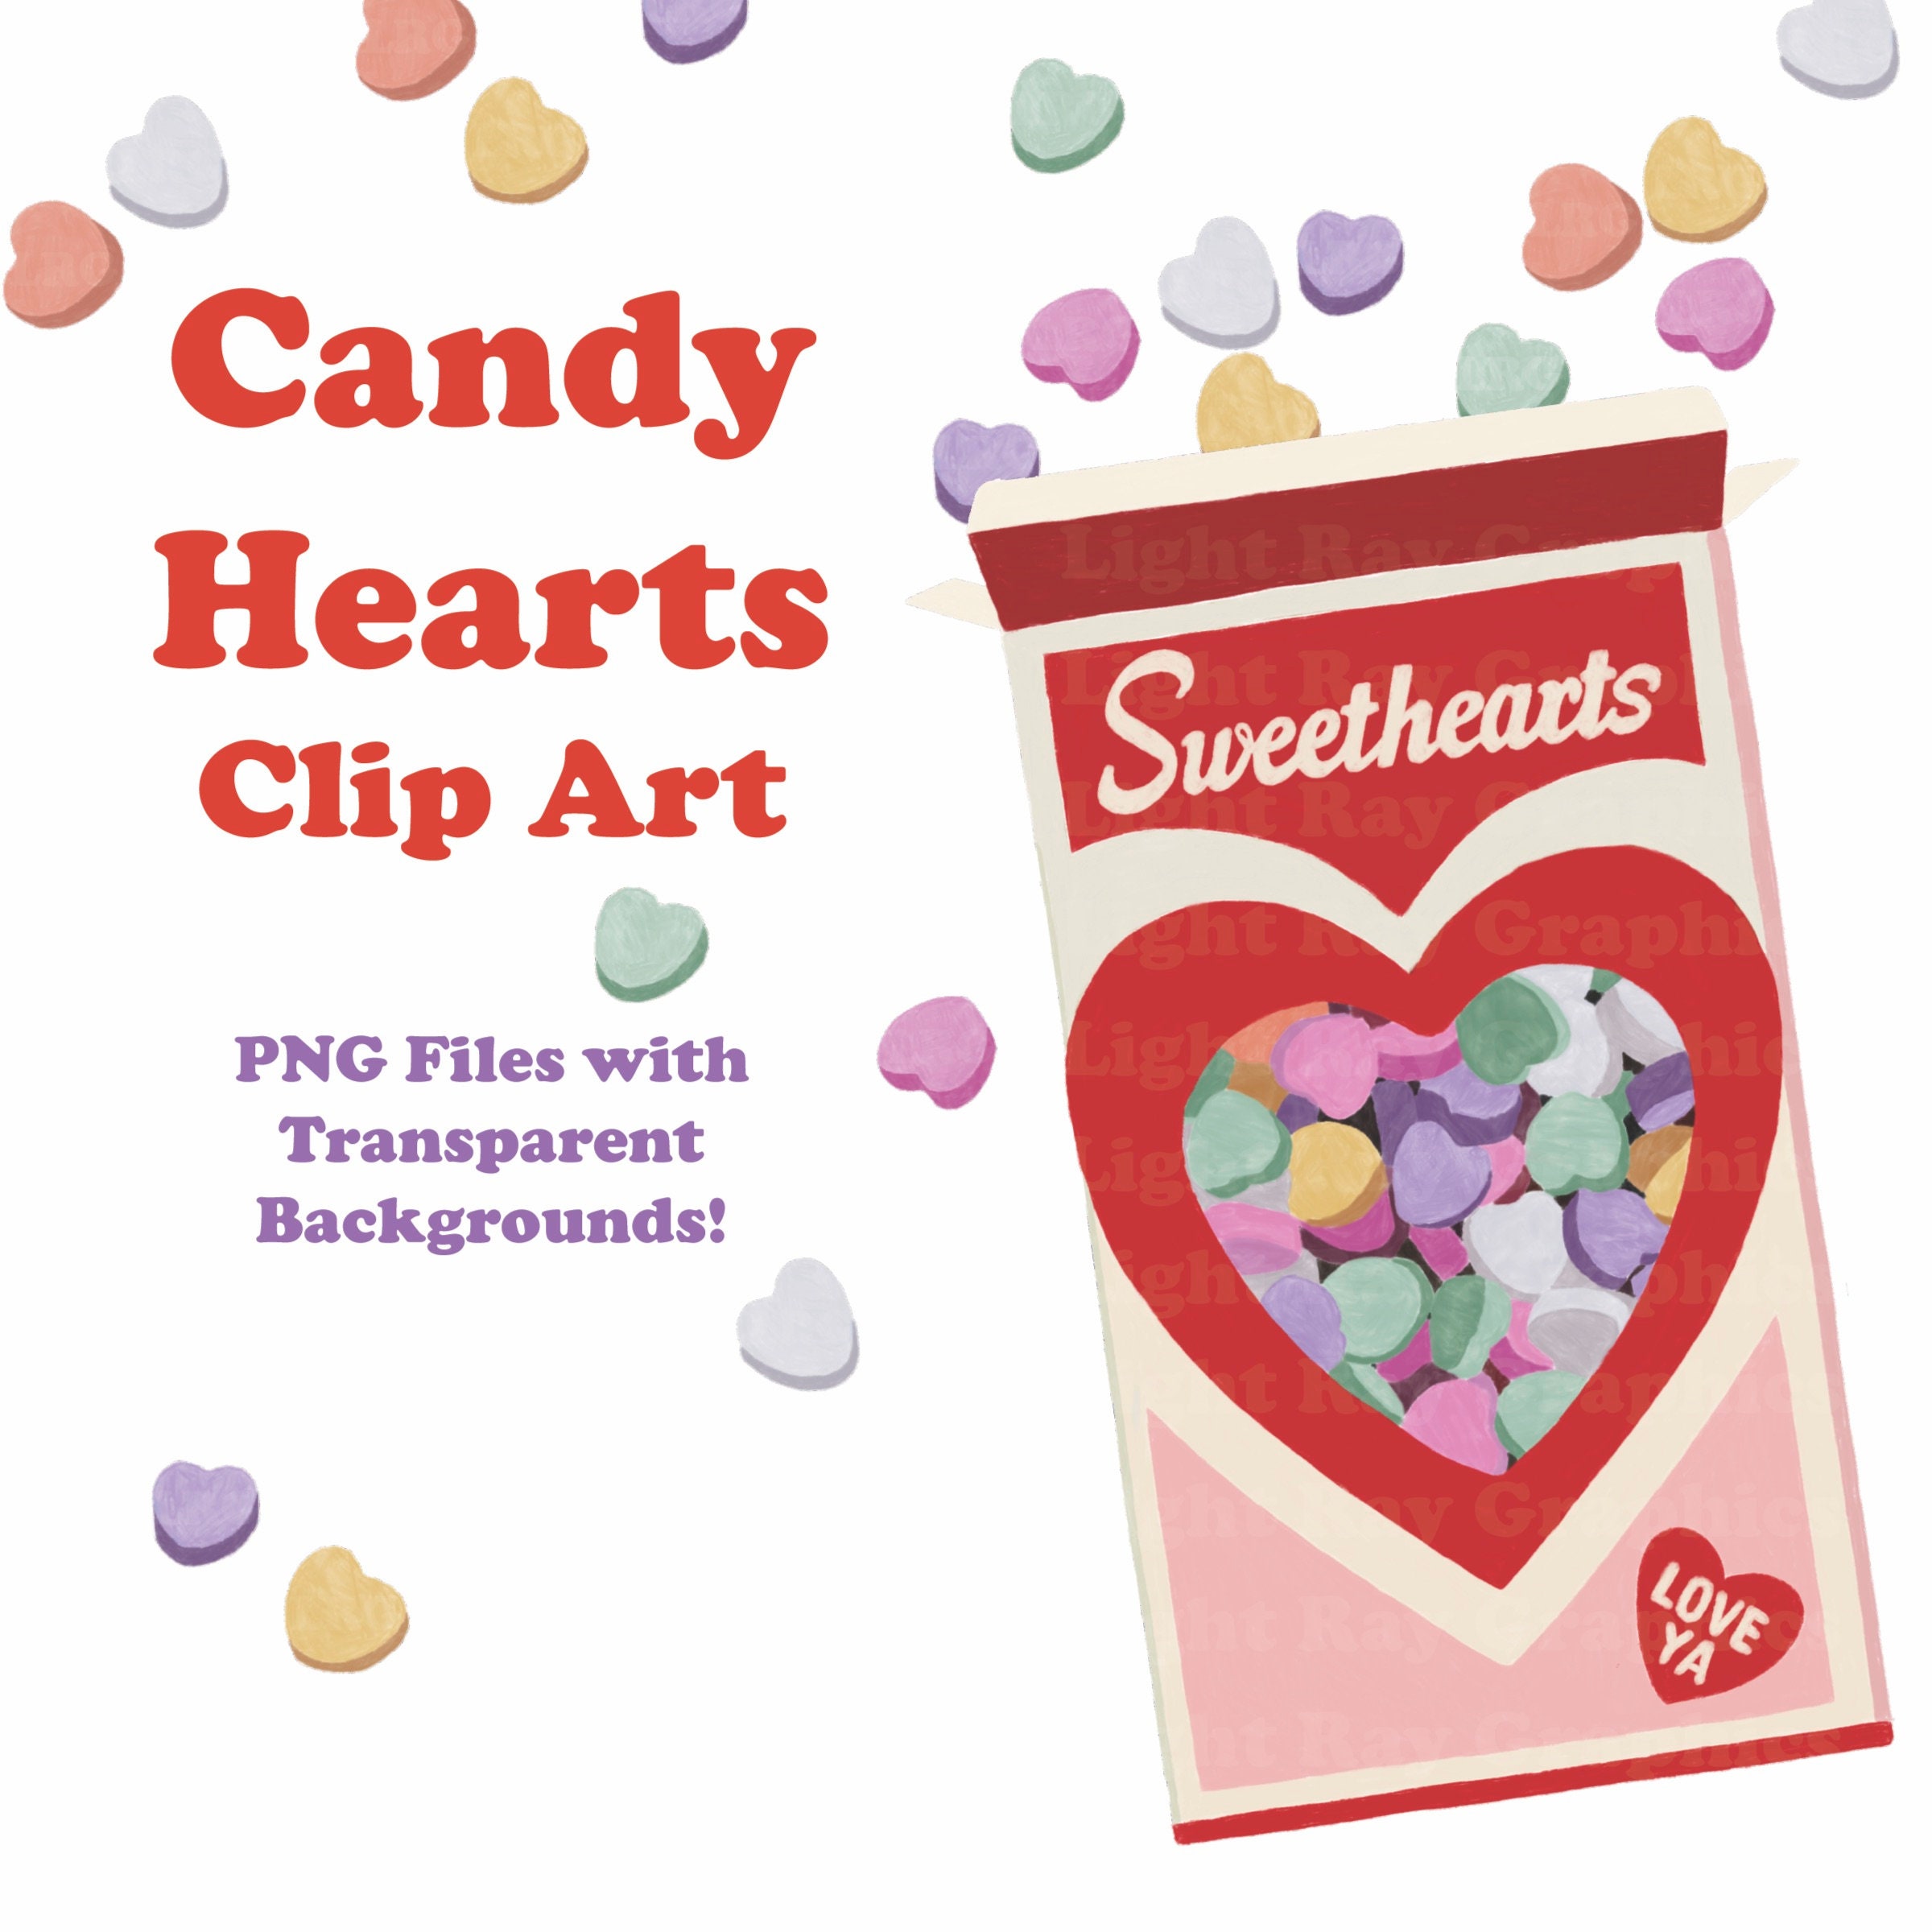 Sweethearts Candies Unveils New Sayings For Valentine's Day 2021 Inspired  By Classic Love Songs